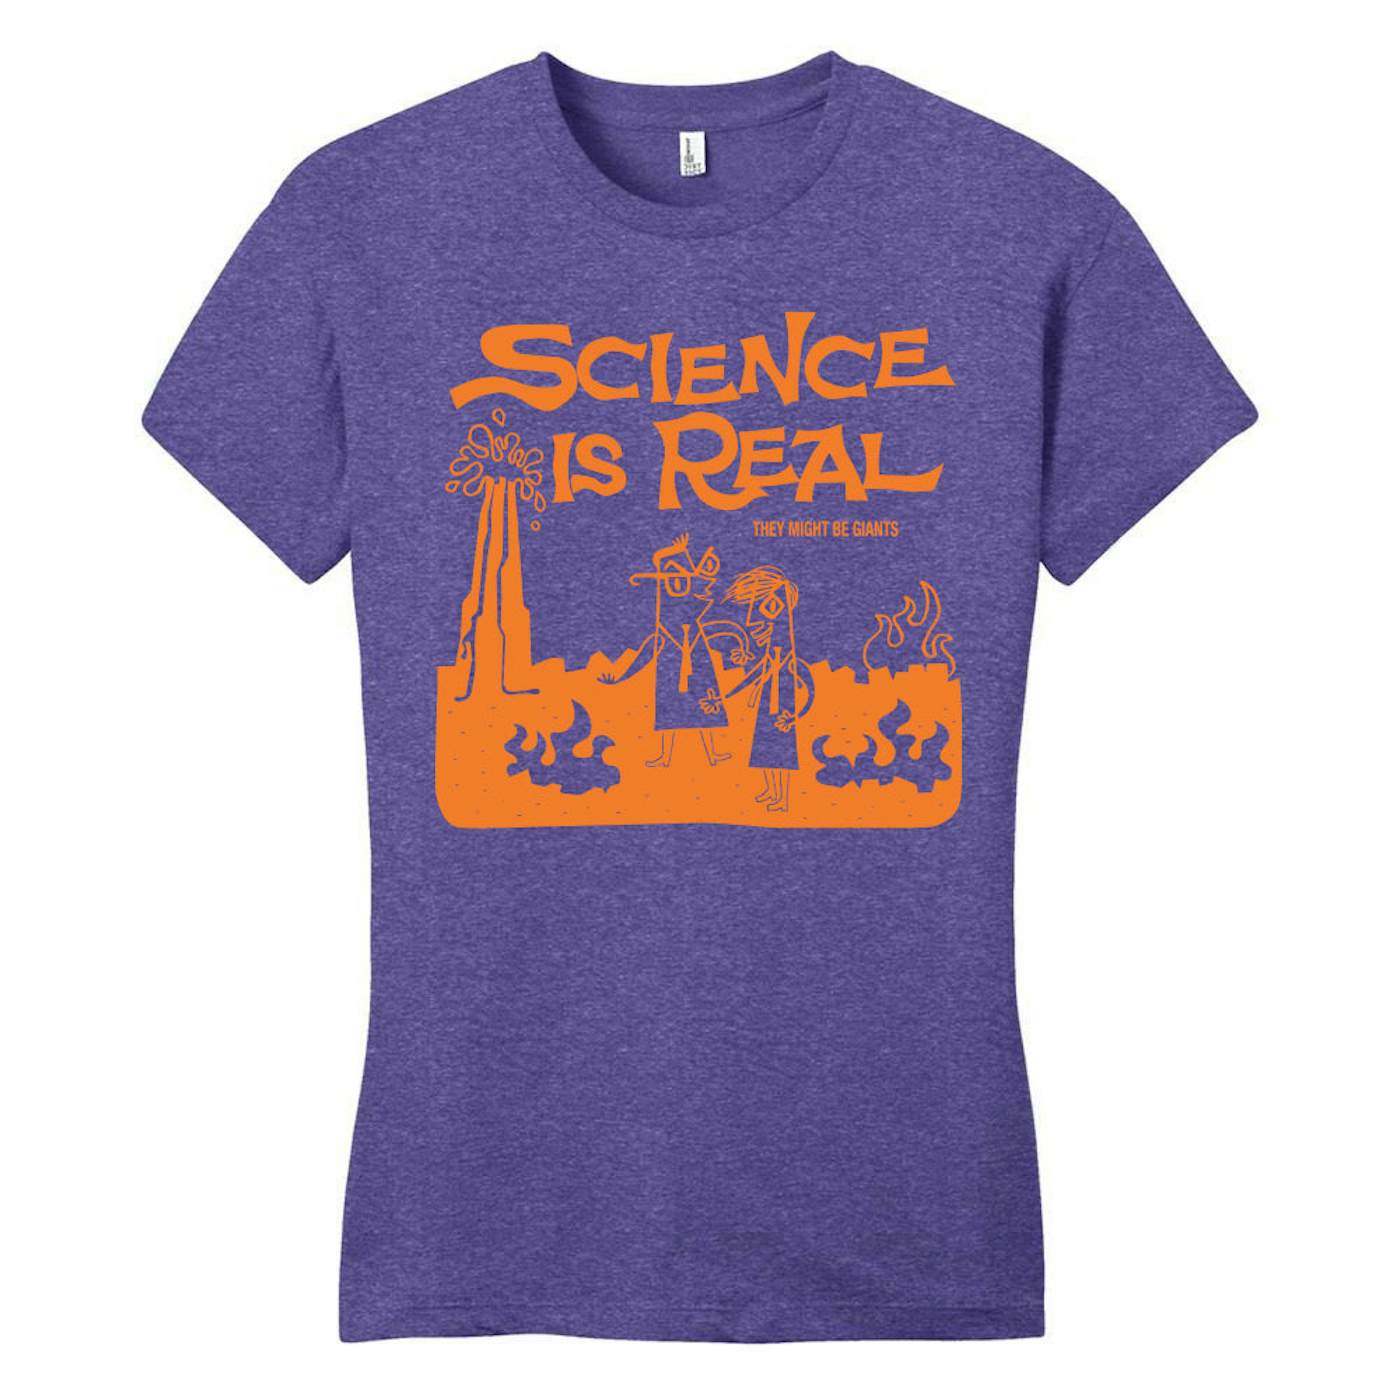 They Might Be Giants Science is Real Purple T-Shirt (Women's)